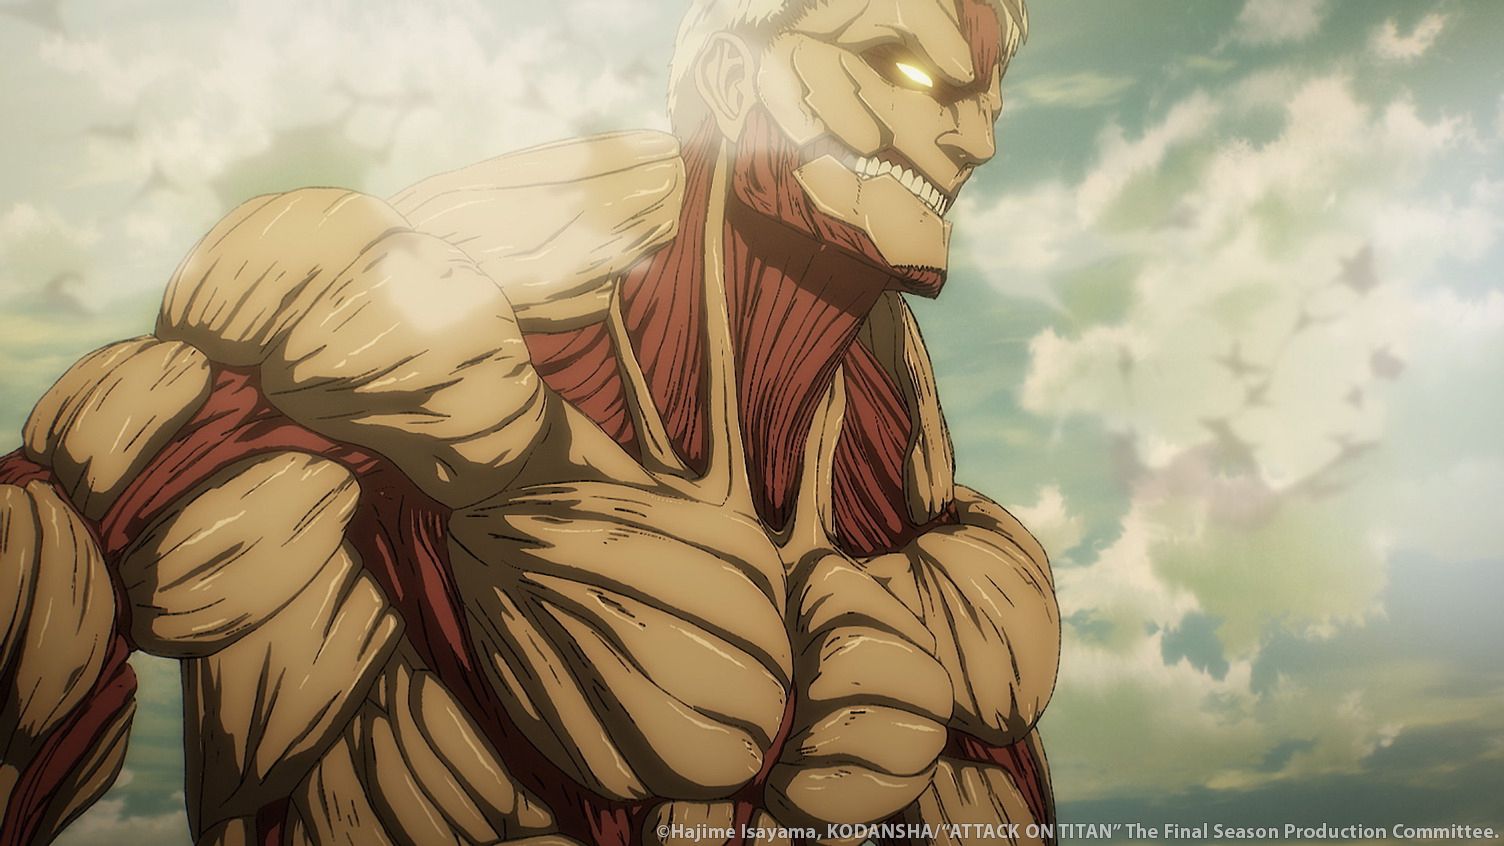 PSA: Alleged Attack on Titan Finale Spoilers Circulating Online